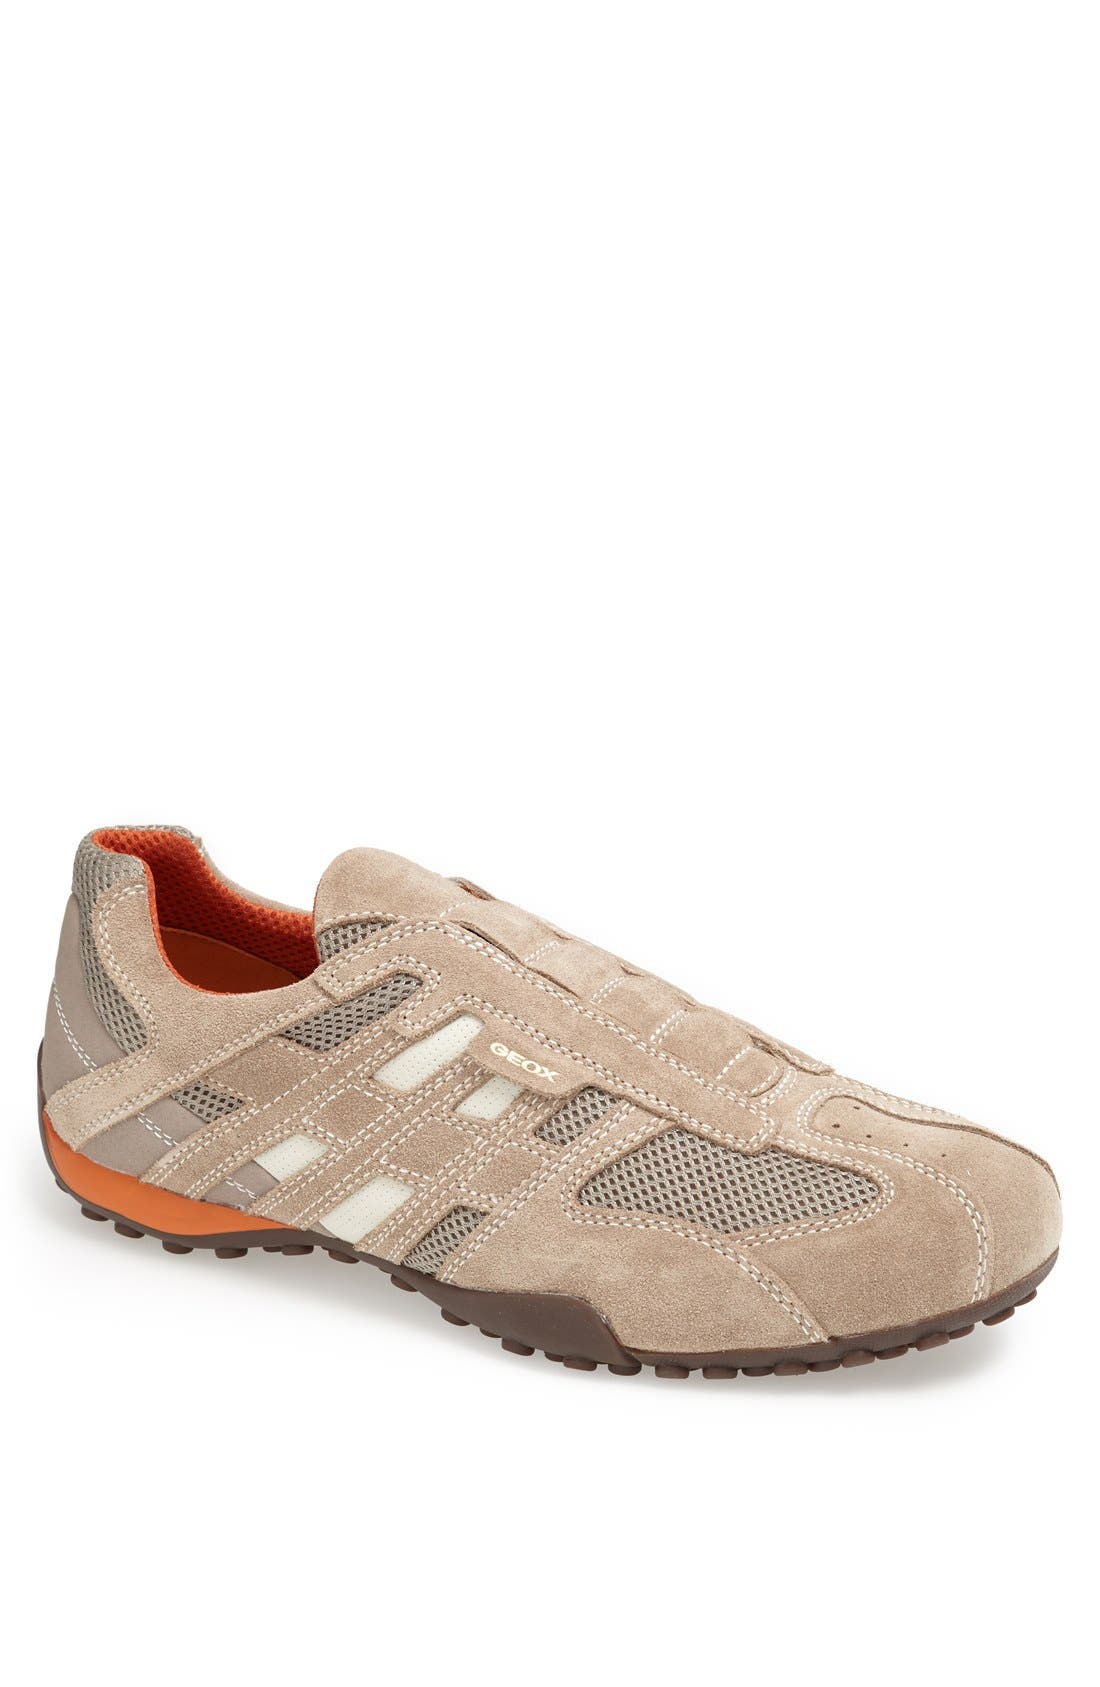 geox shoes clearance